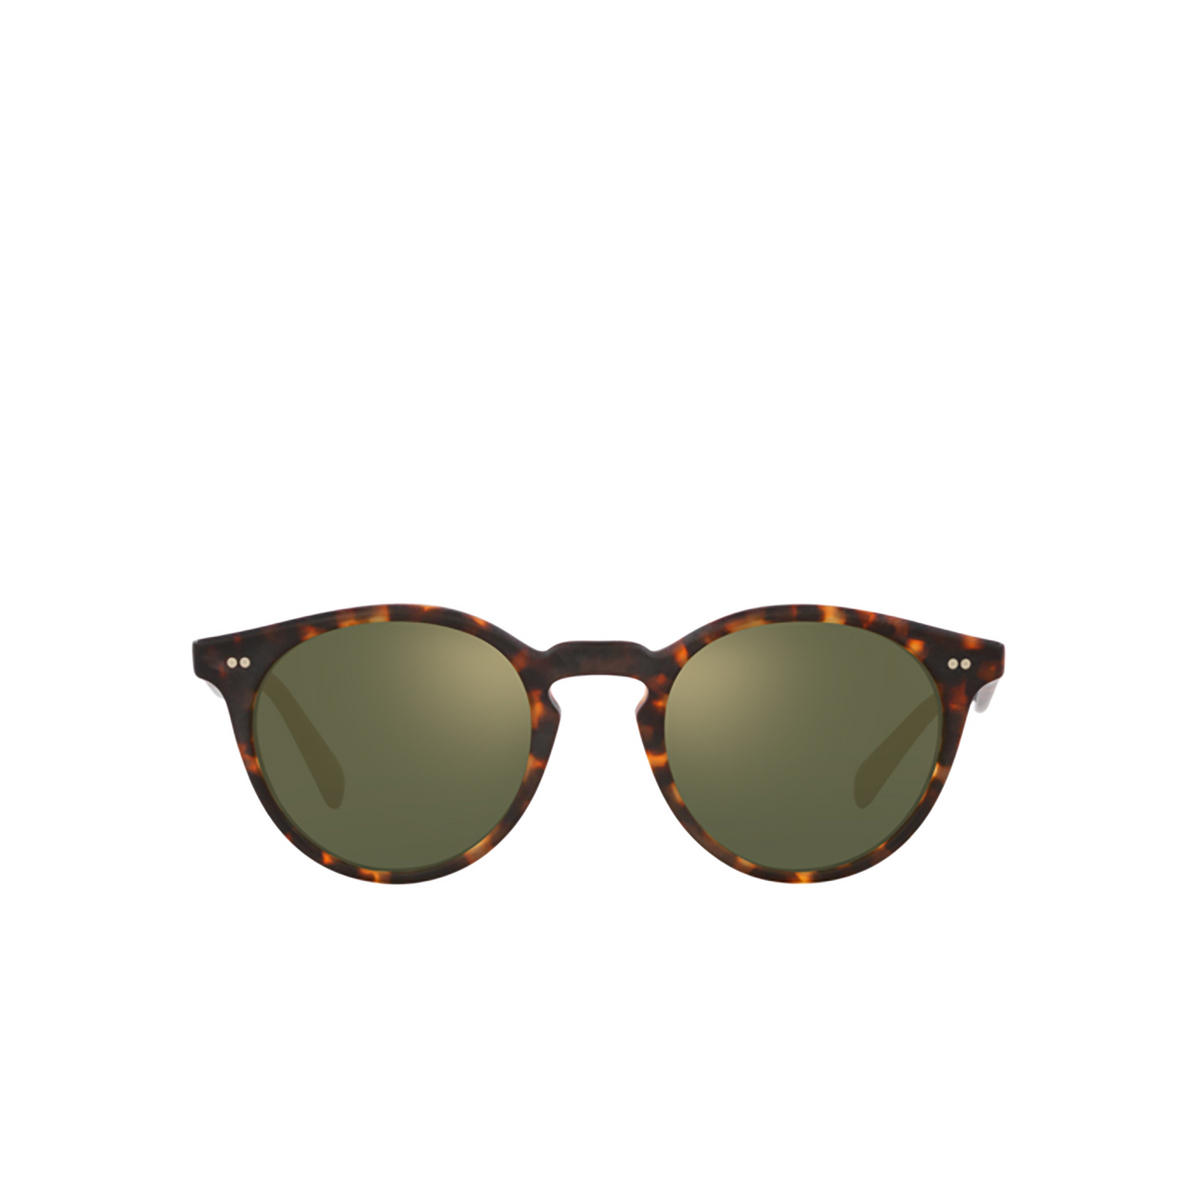 Oliver Peoples ROMARE Sunglasses 1454O8 Semi-Matte Sable Tortoise - front view